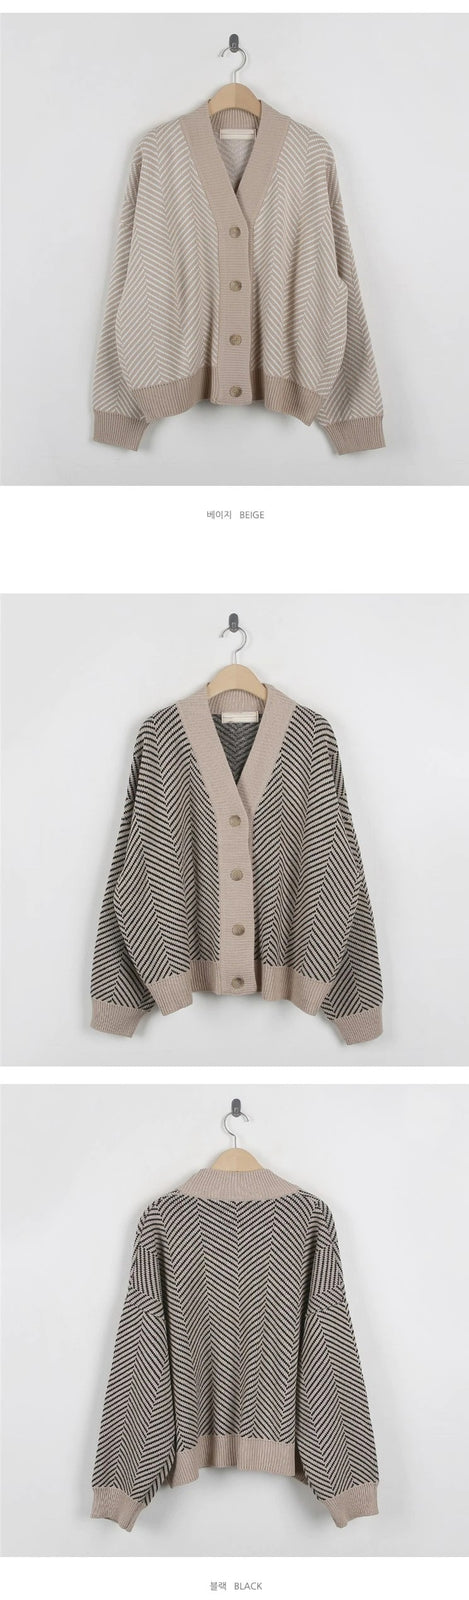 Oversize Vintage Cardigans Loose Winter Sweater Knitted Plus Size Cardigan